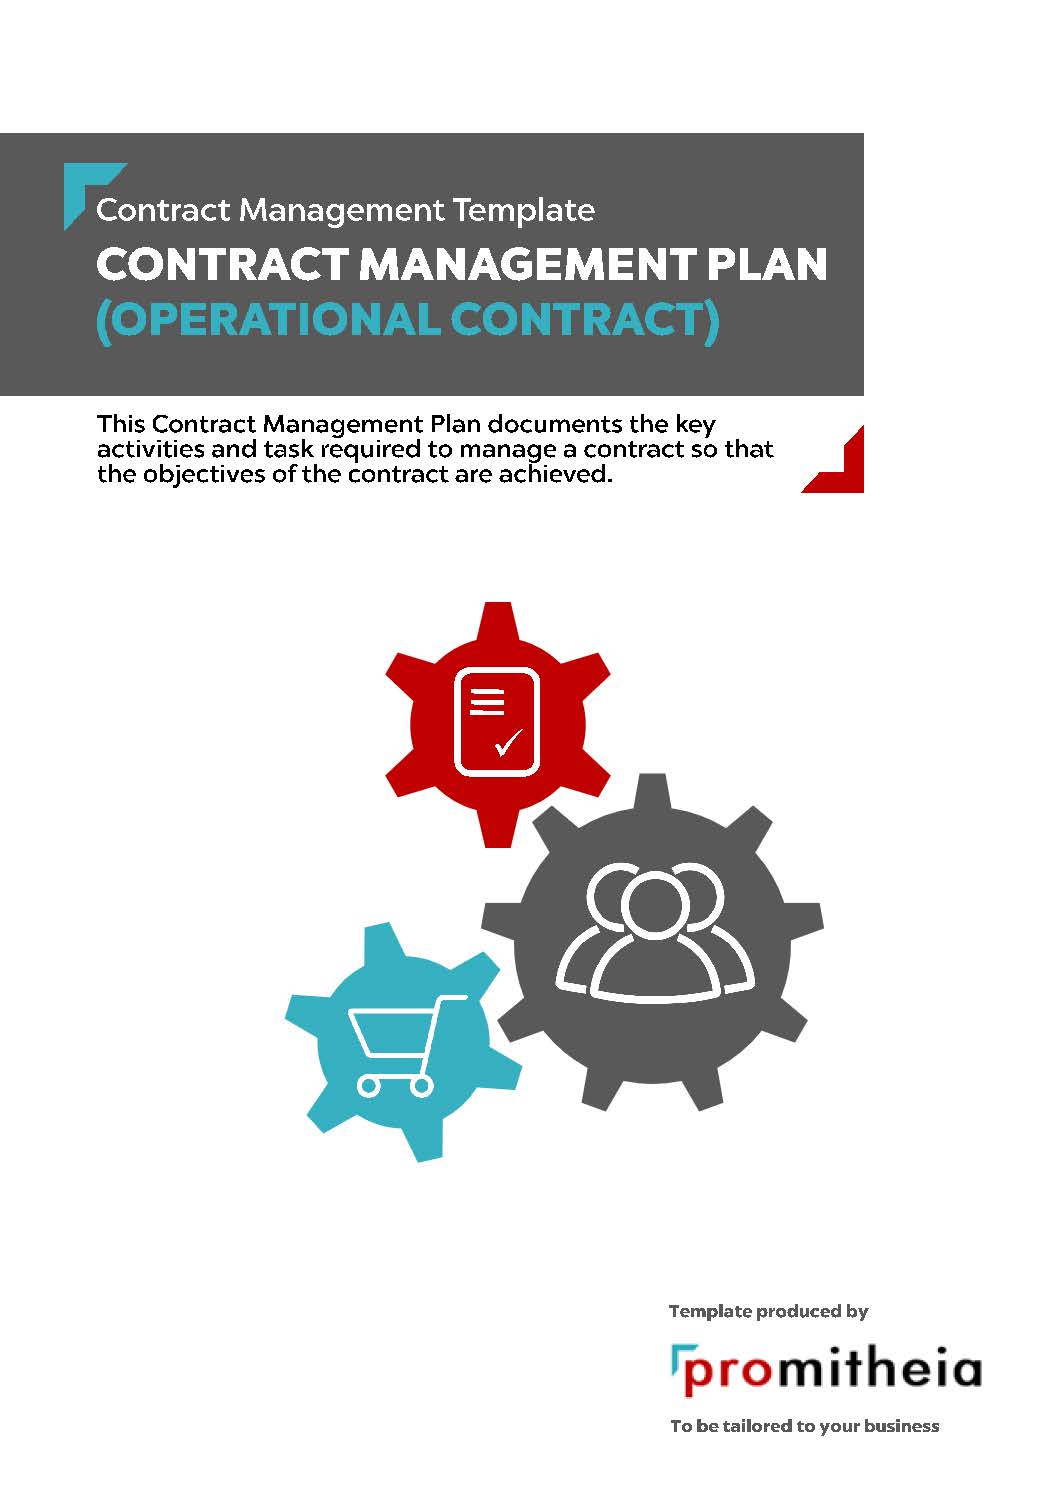 Contract Management Plan - Operational